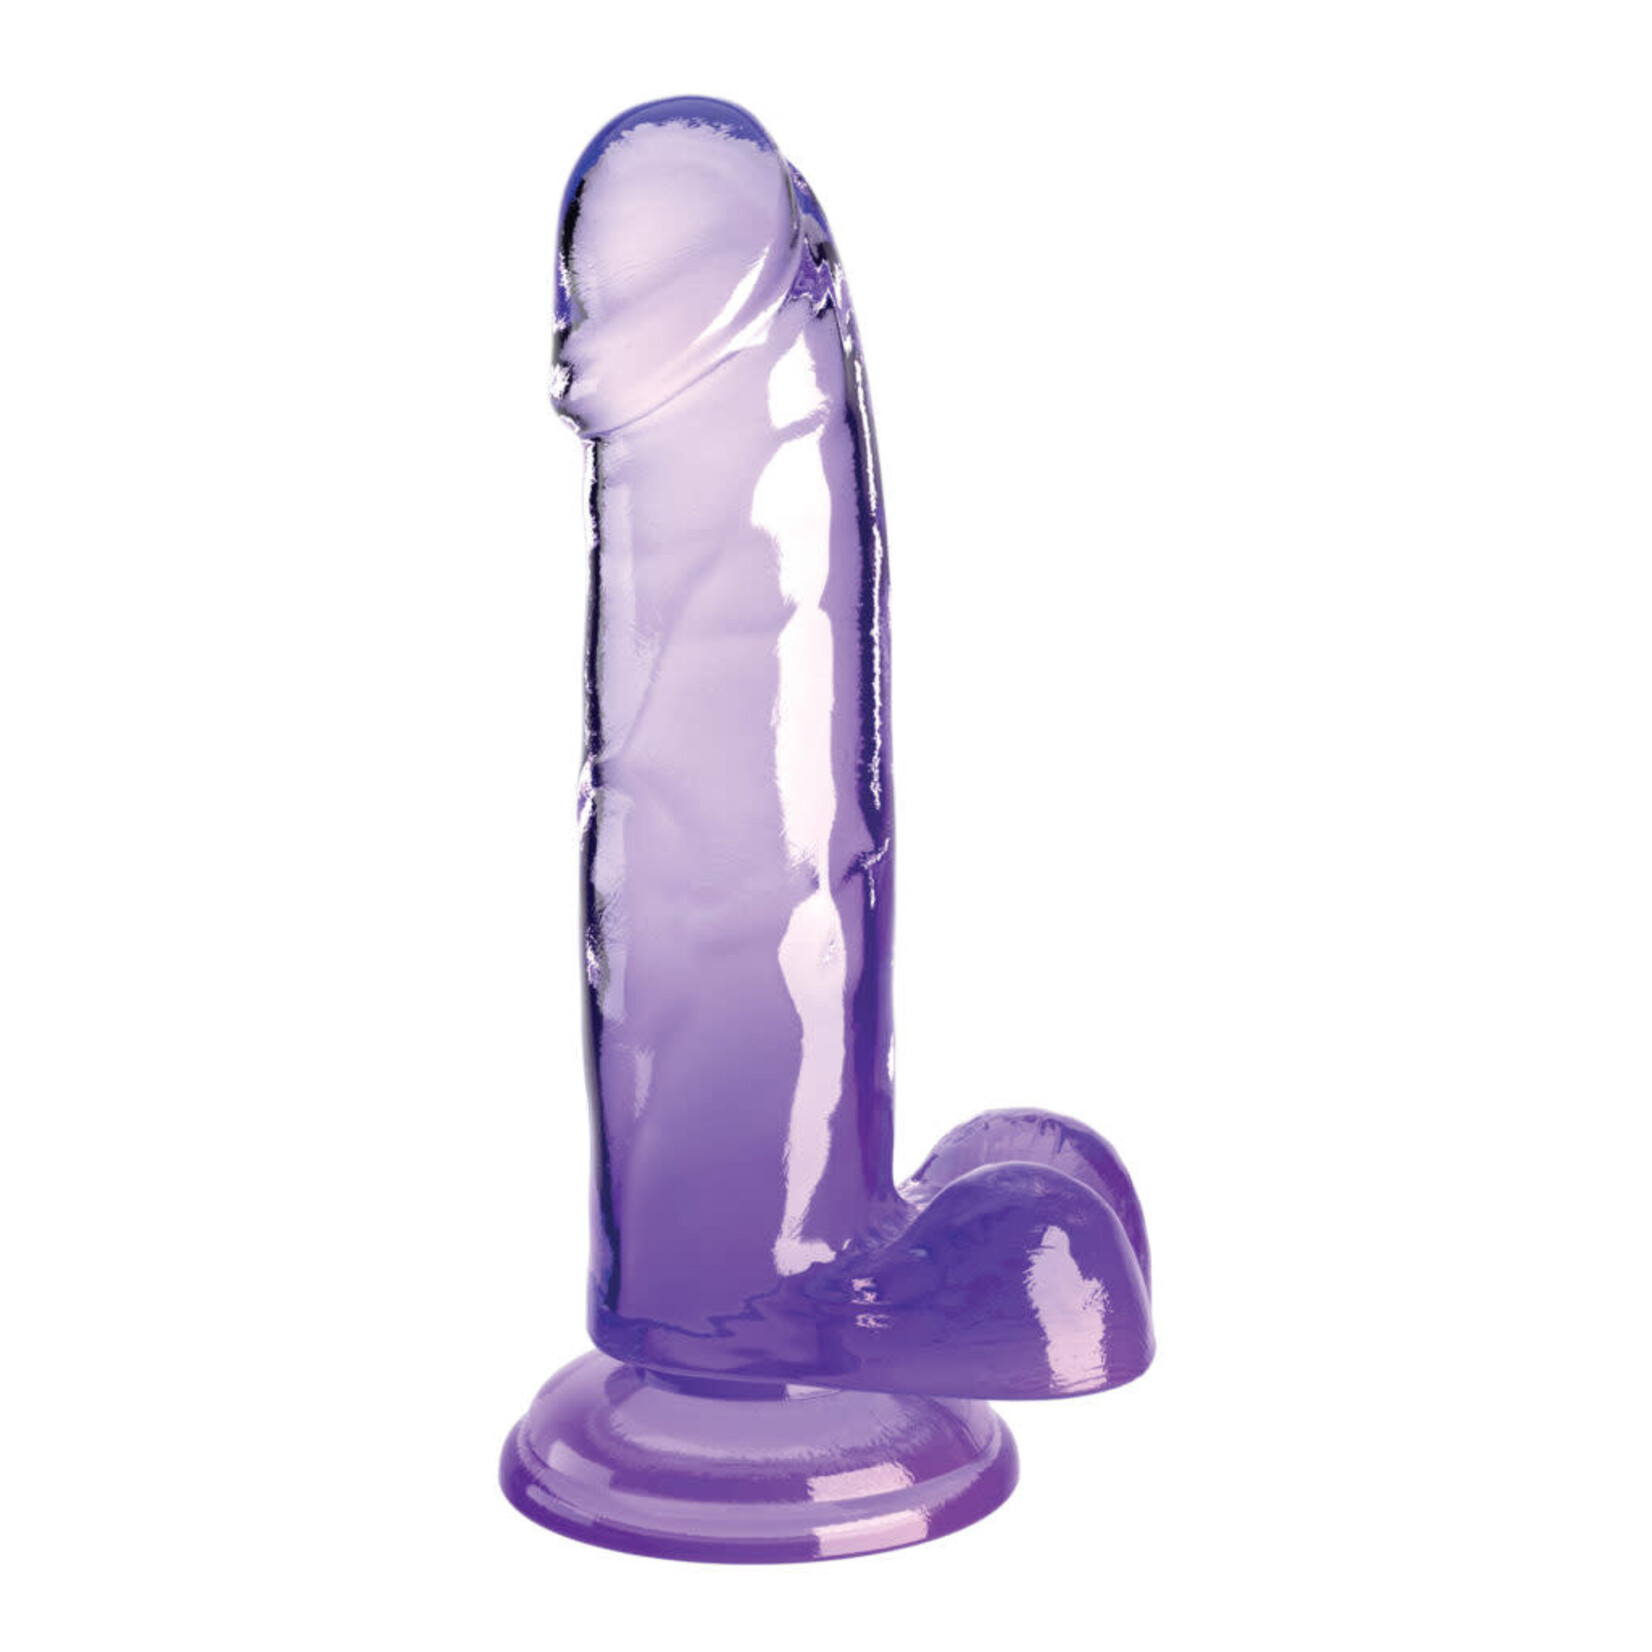 KING COCK KING COCK - CLEAR 7" COCK WITH BALLS - PURPLE